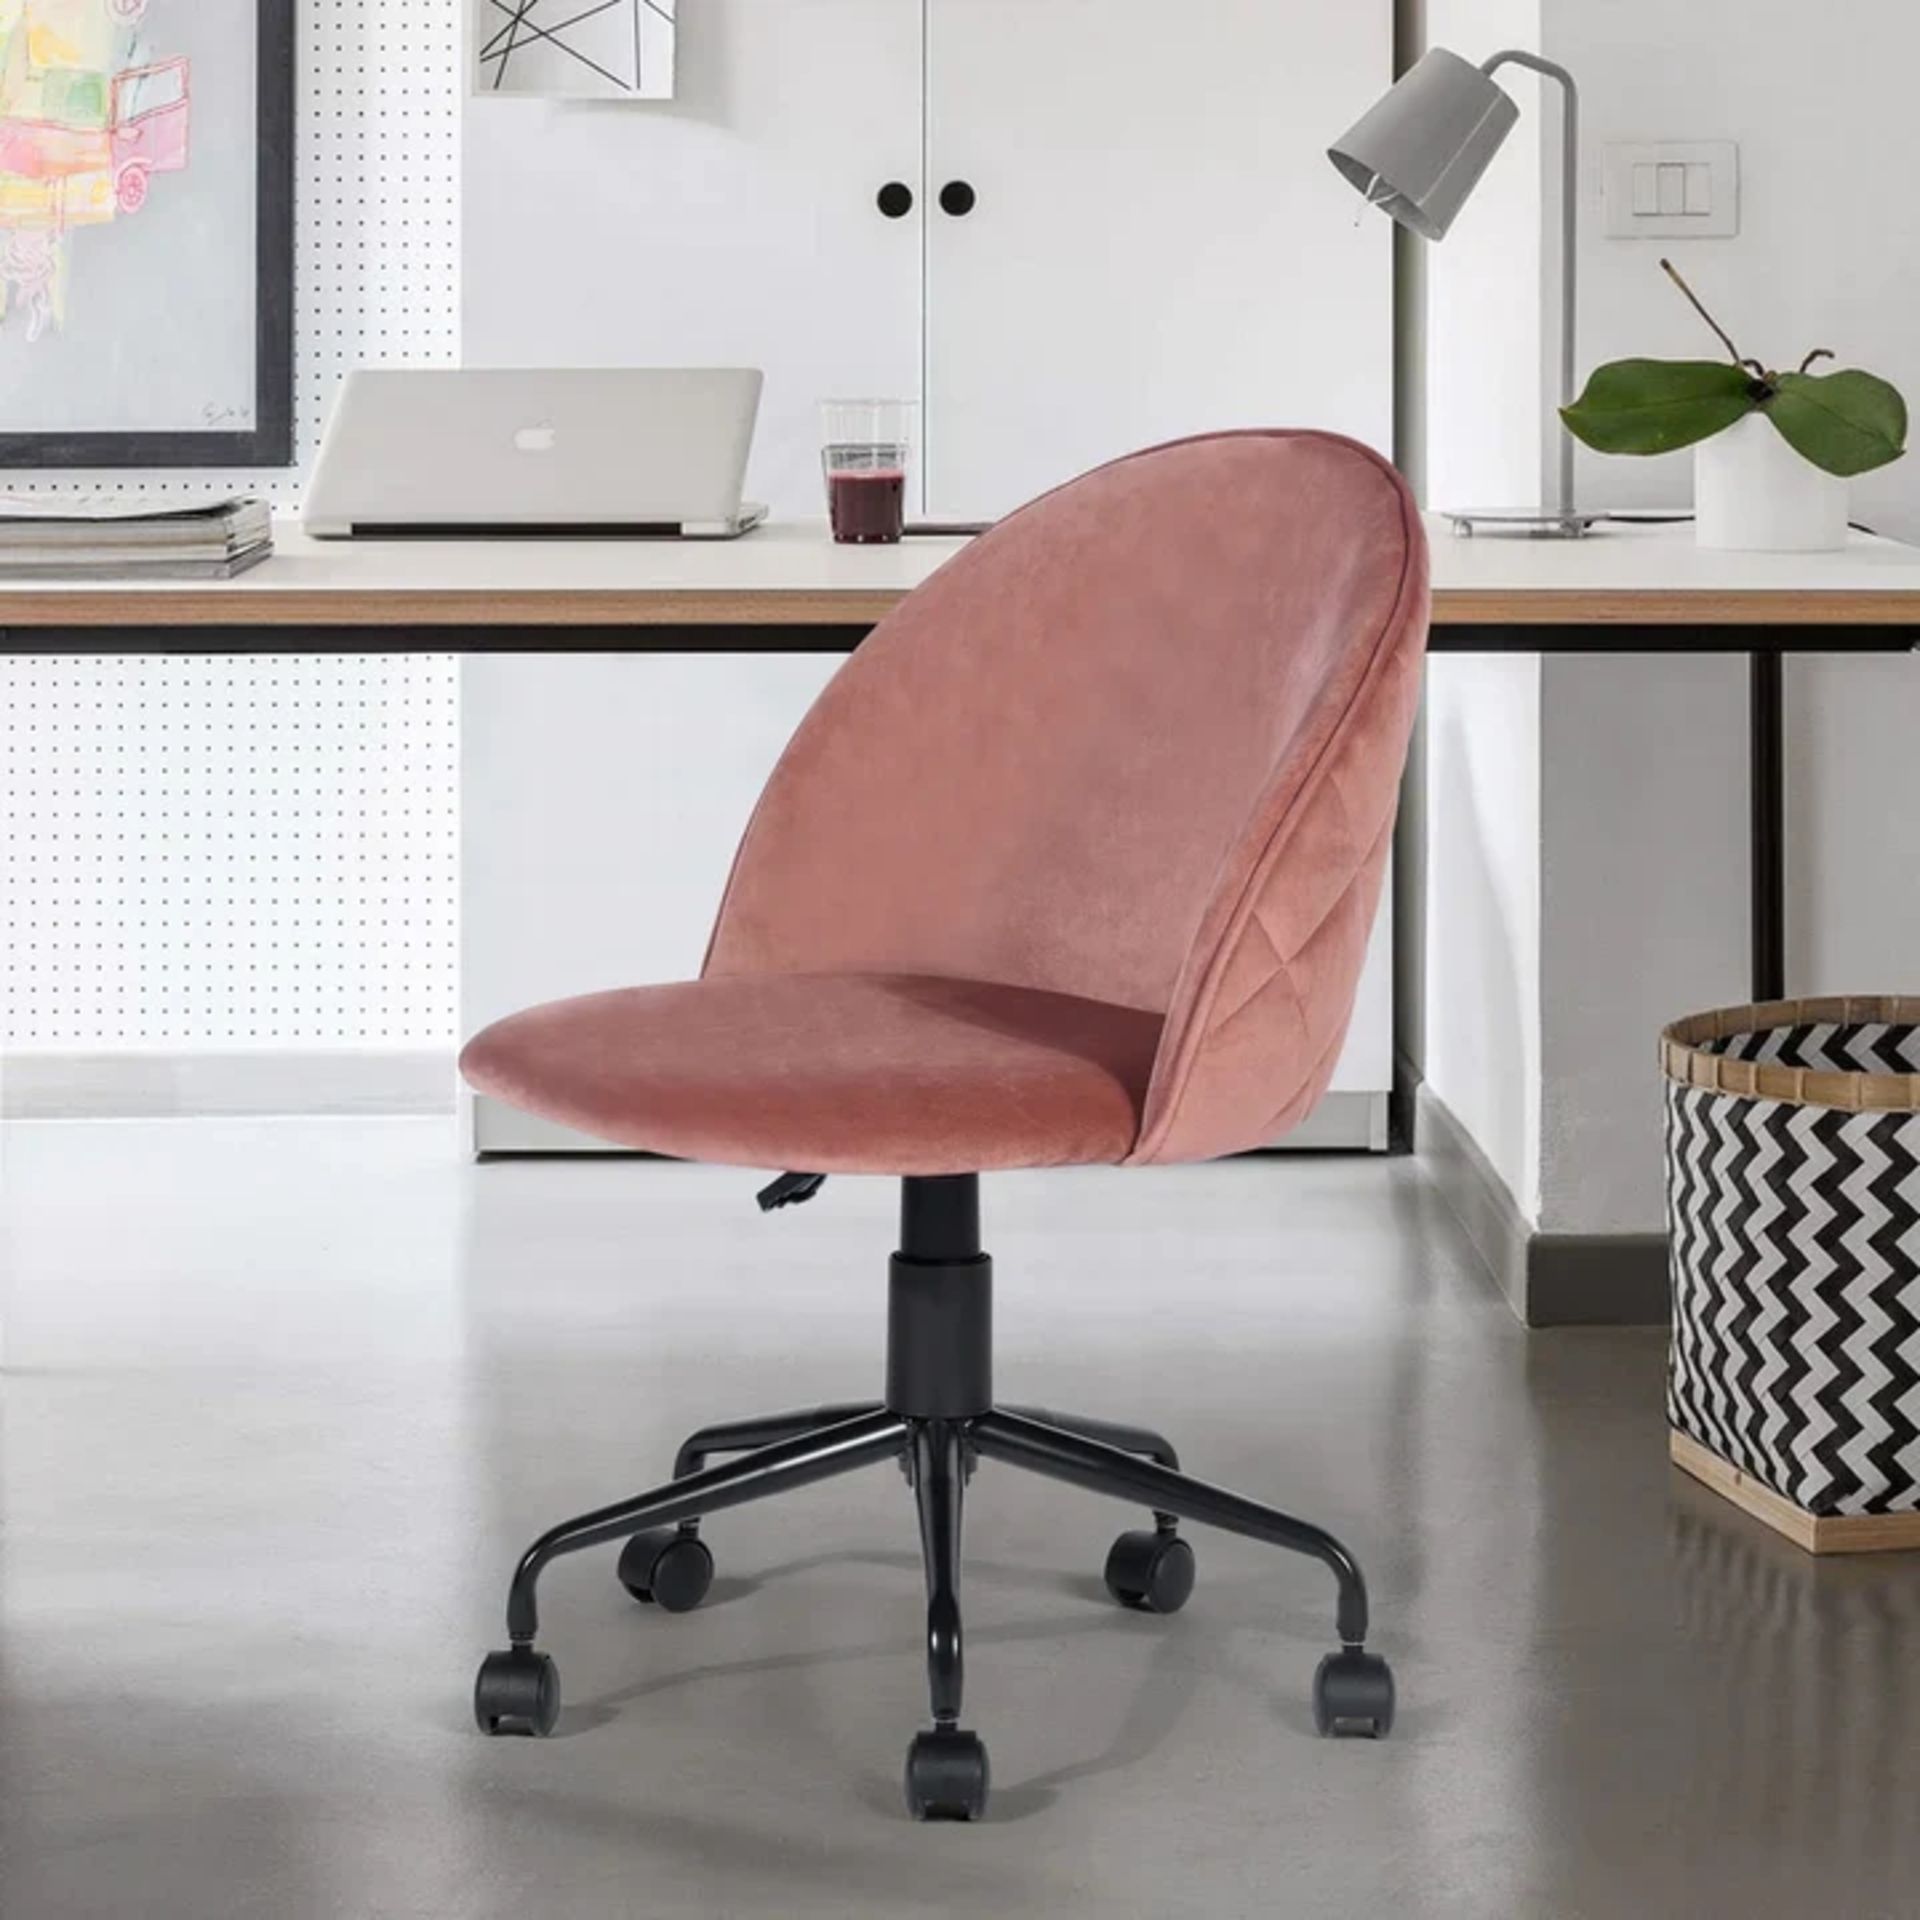 NEW & BOXED KLARA Office Chair - BLUSH. RRP £129. The Klara Office Chair is a luxurious and